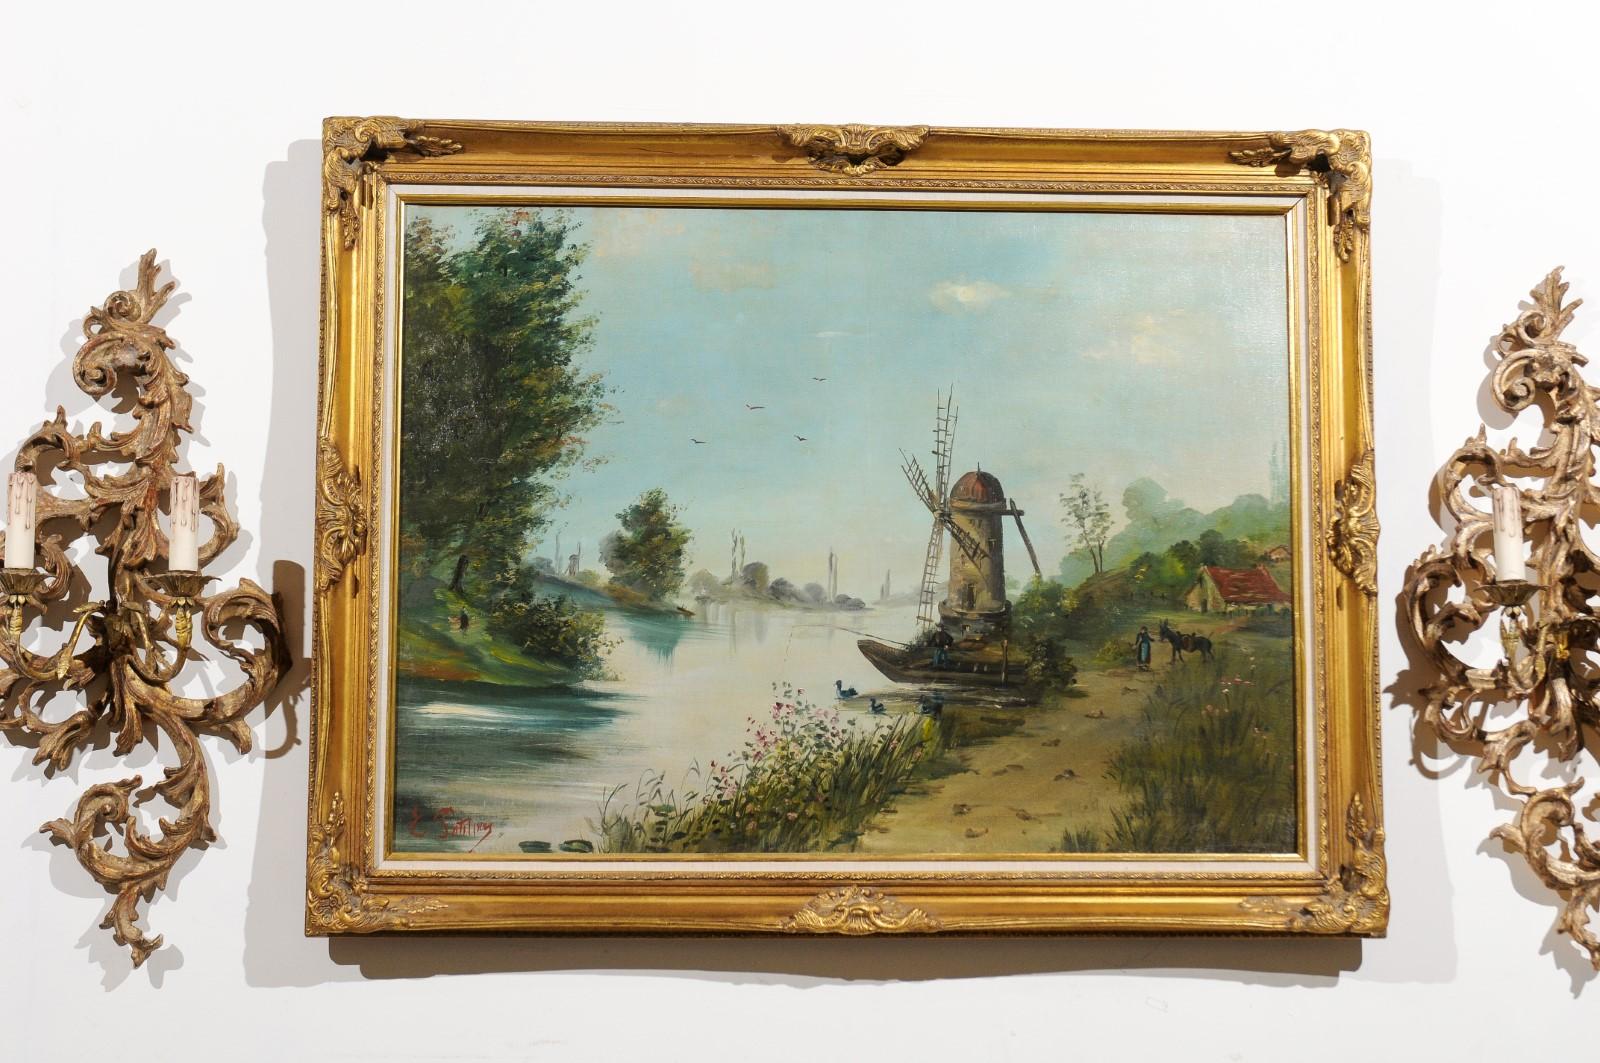 A French oil on canvas landscape painting from the early 20th century with giltwood frame, signed Eugène Petitpas. Born in France during the early years of the 20th century, this charming oil on canvas painting features a palette made of blue, green